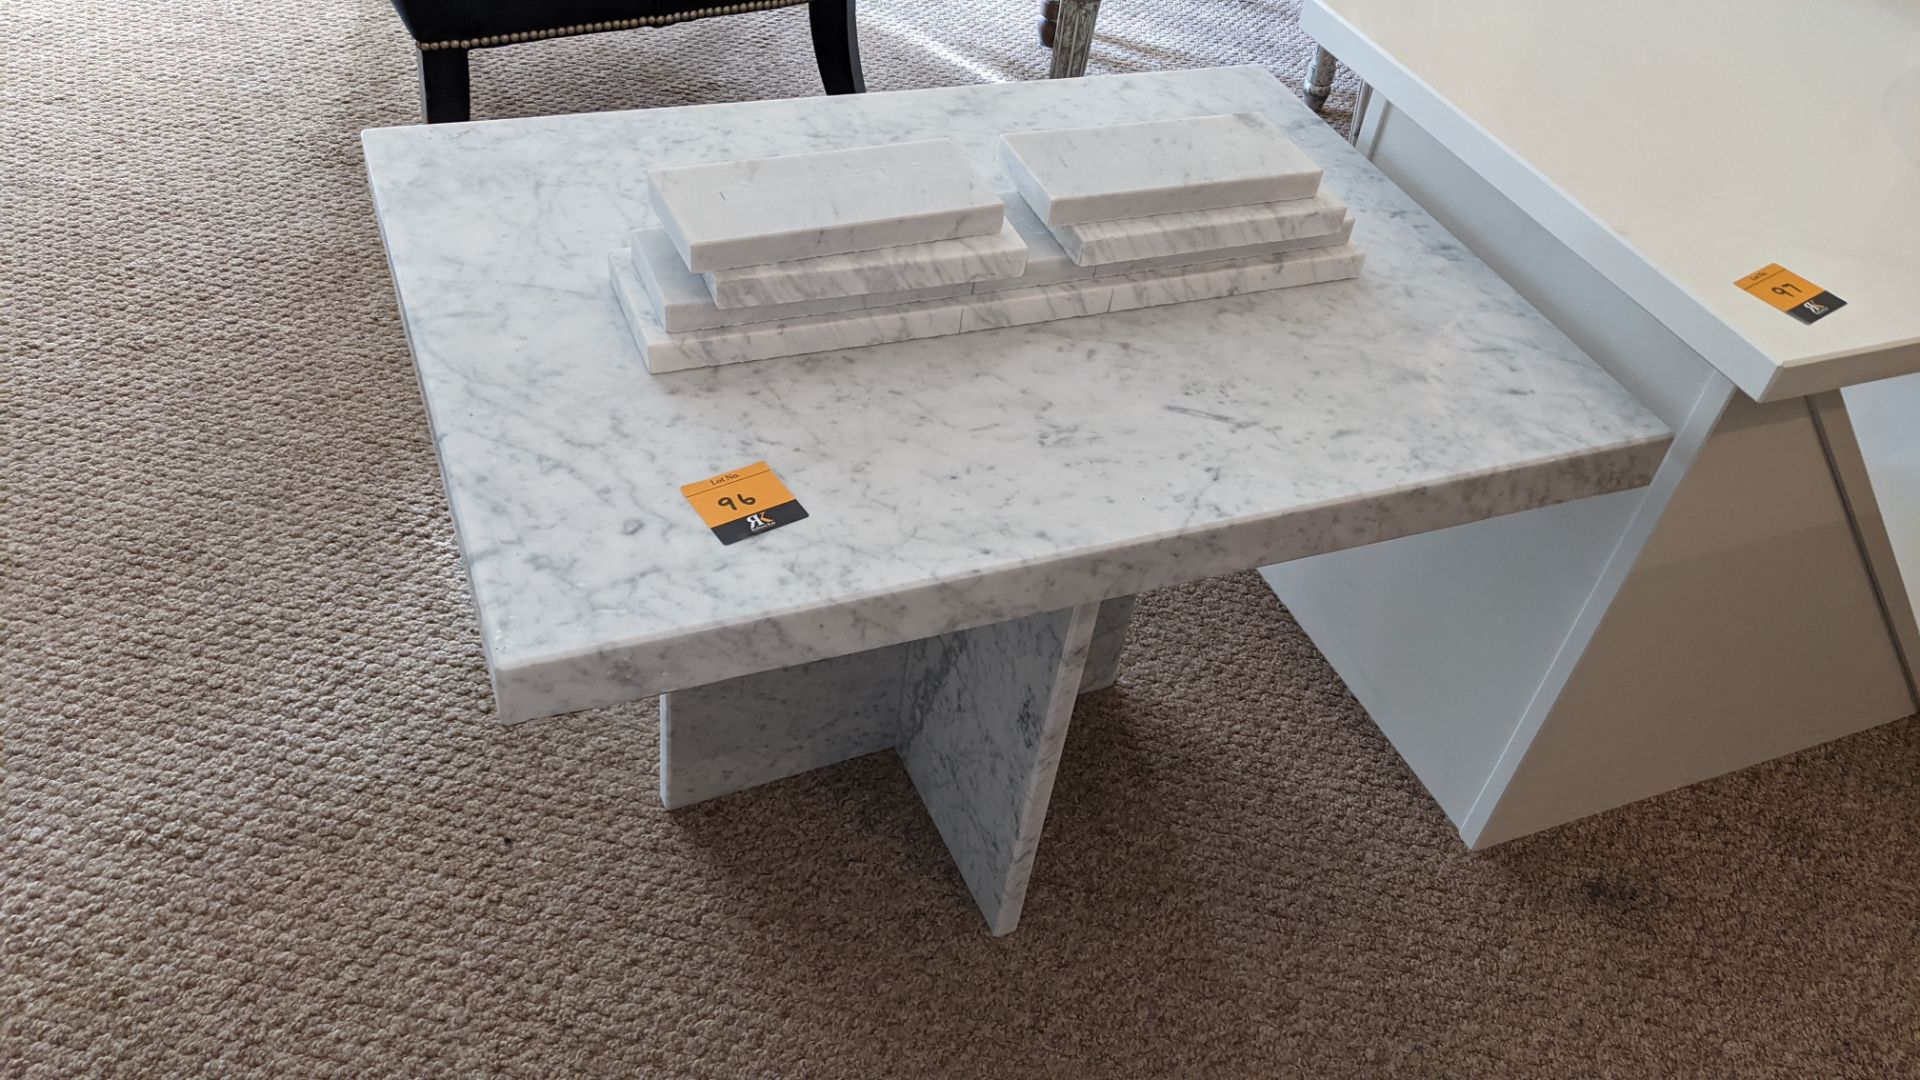 Small granite table with optional loose feet, tabletop measuring 700 x 500mm, height of table approx